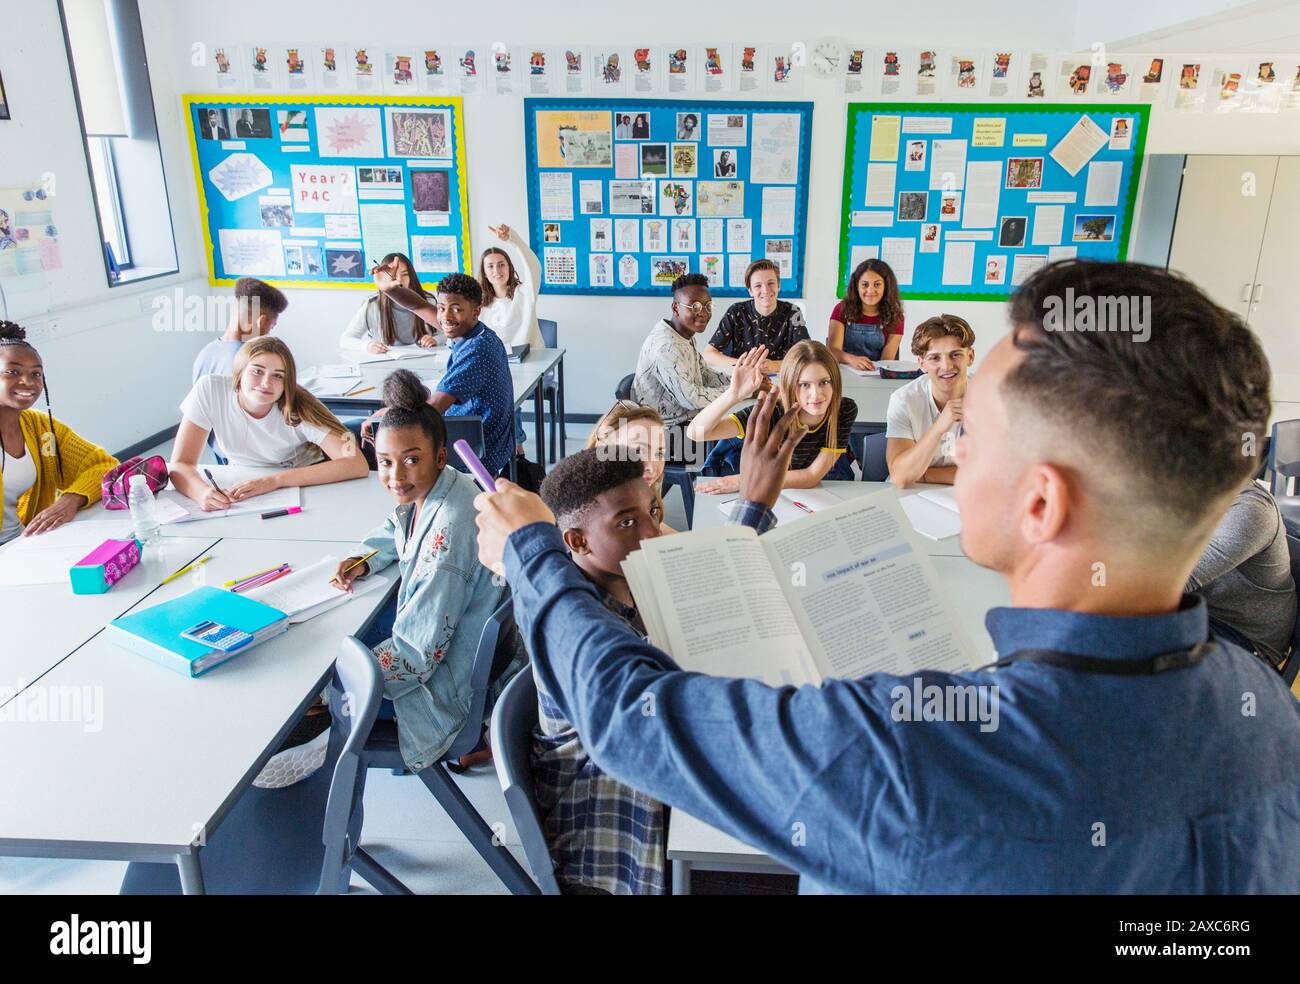 High school teacher calling on students during lesson in classroom Stock Photo